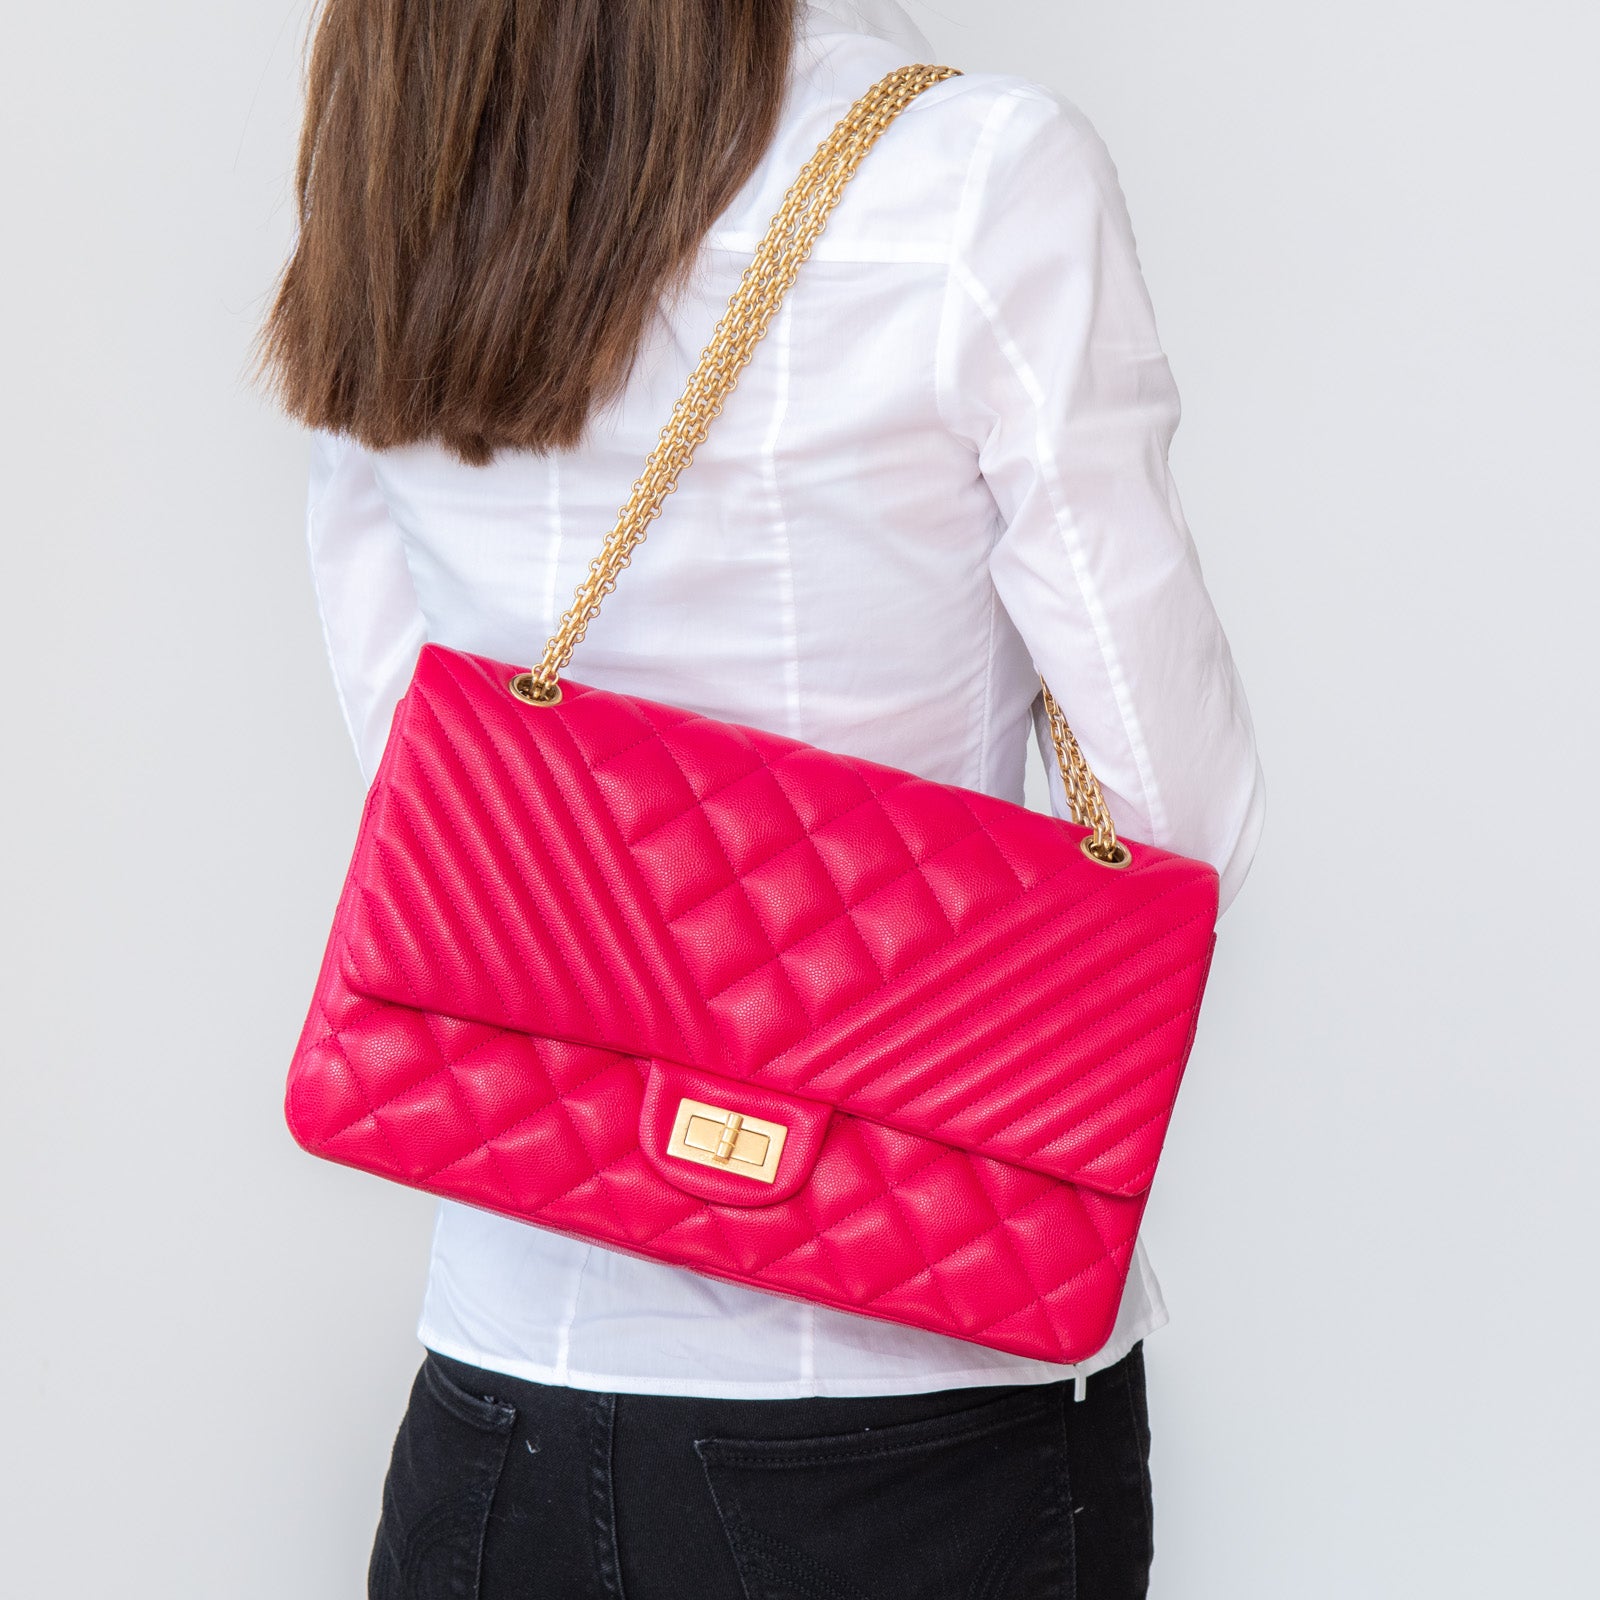 Chanel Chevron Quilted Pink Large Reissue 2.55 Double Flap Bag - Image 6 of 11